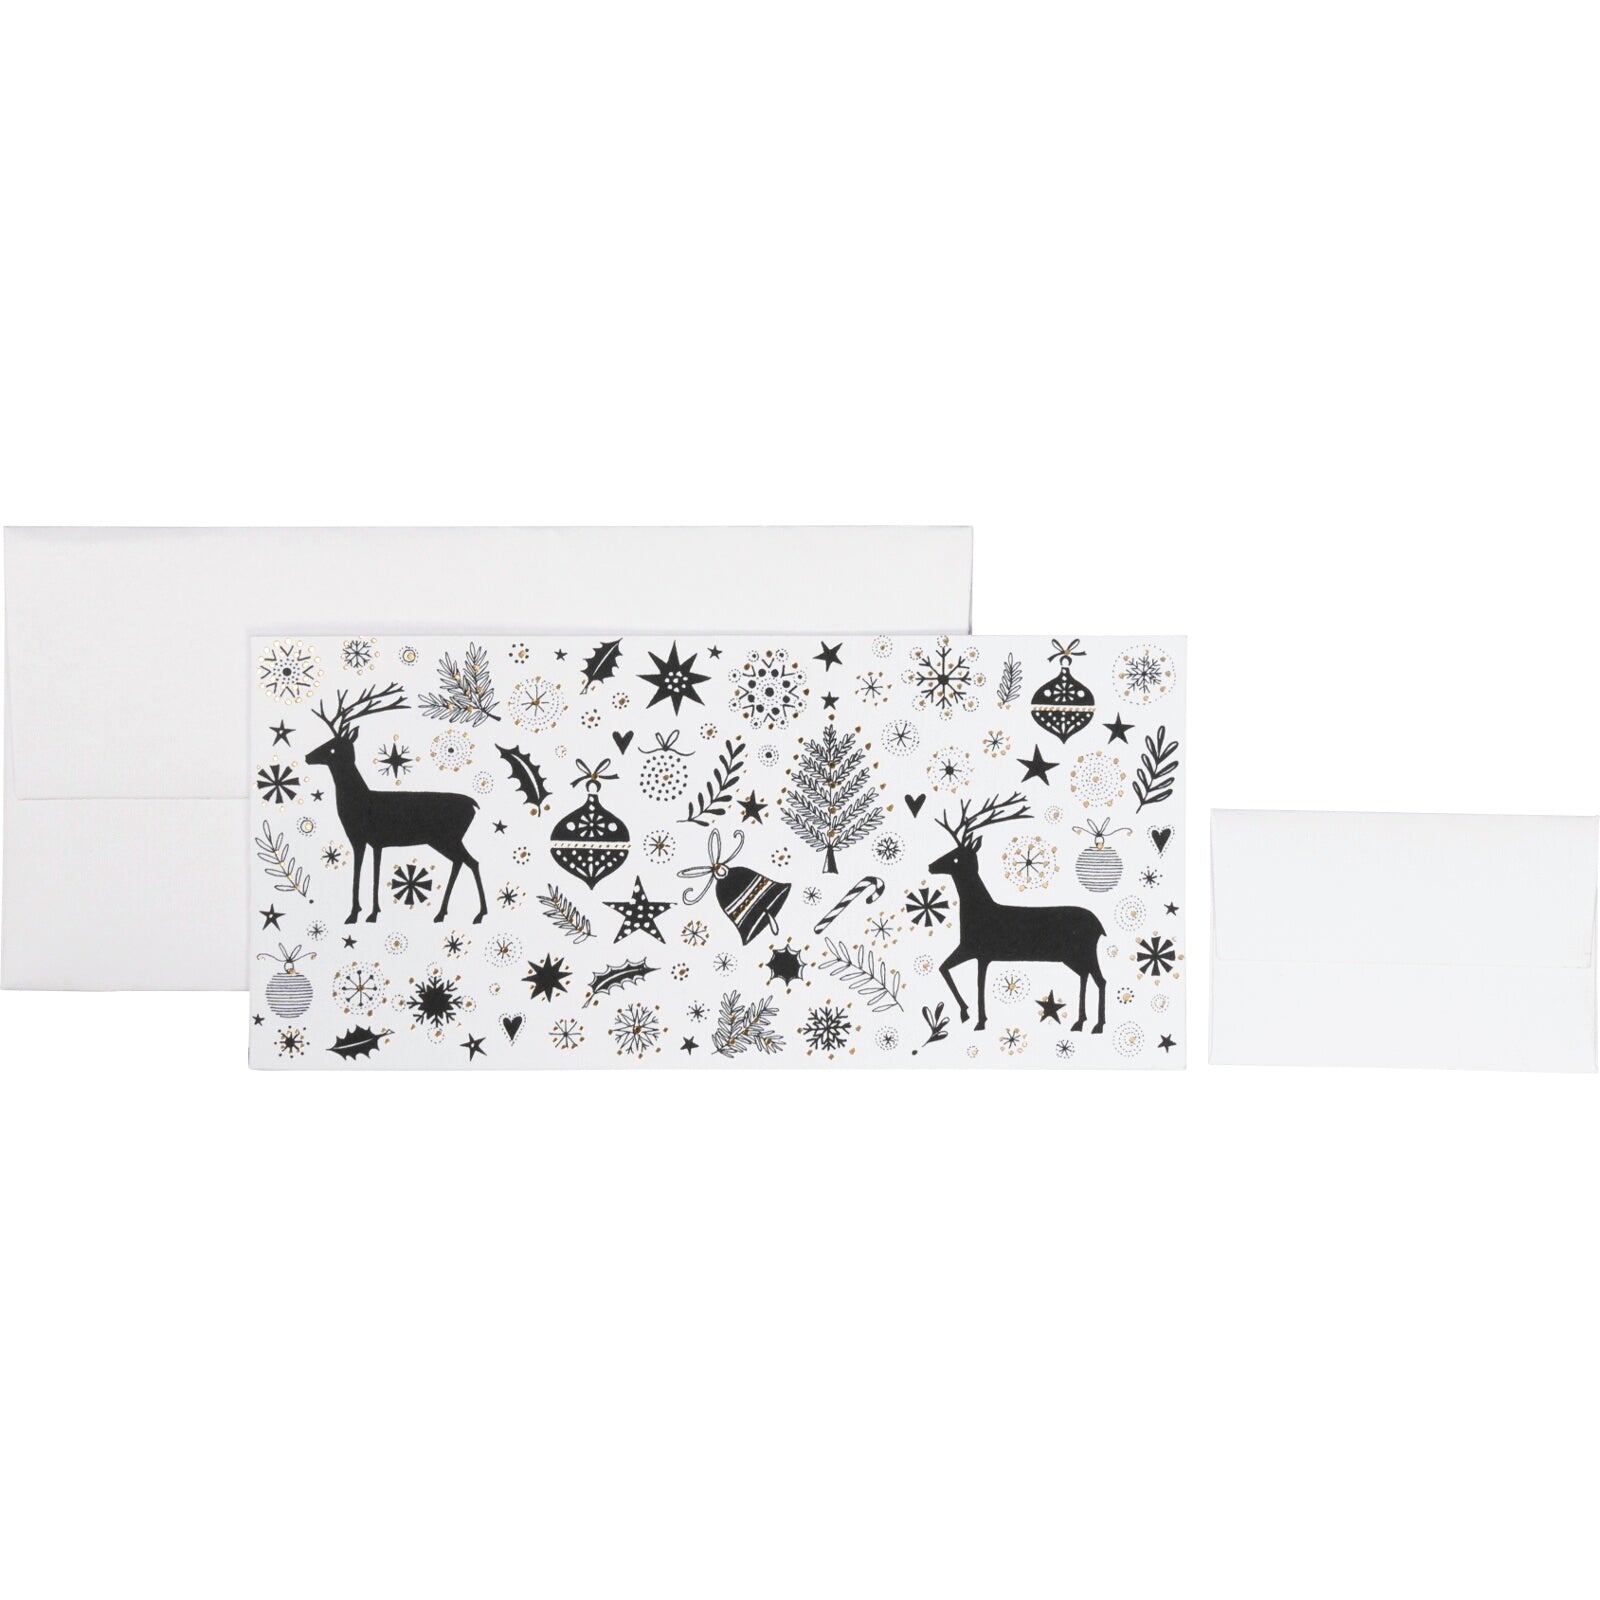 Cedric Monochrome Christmas Gift Voucher Wallet by penny black